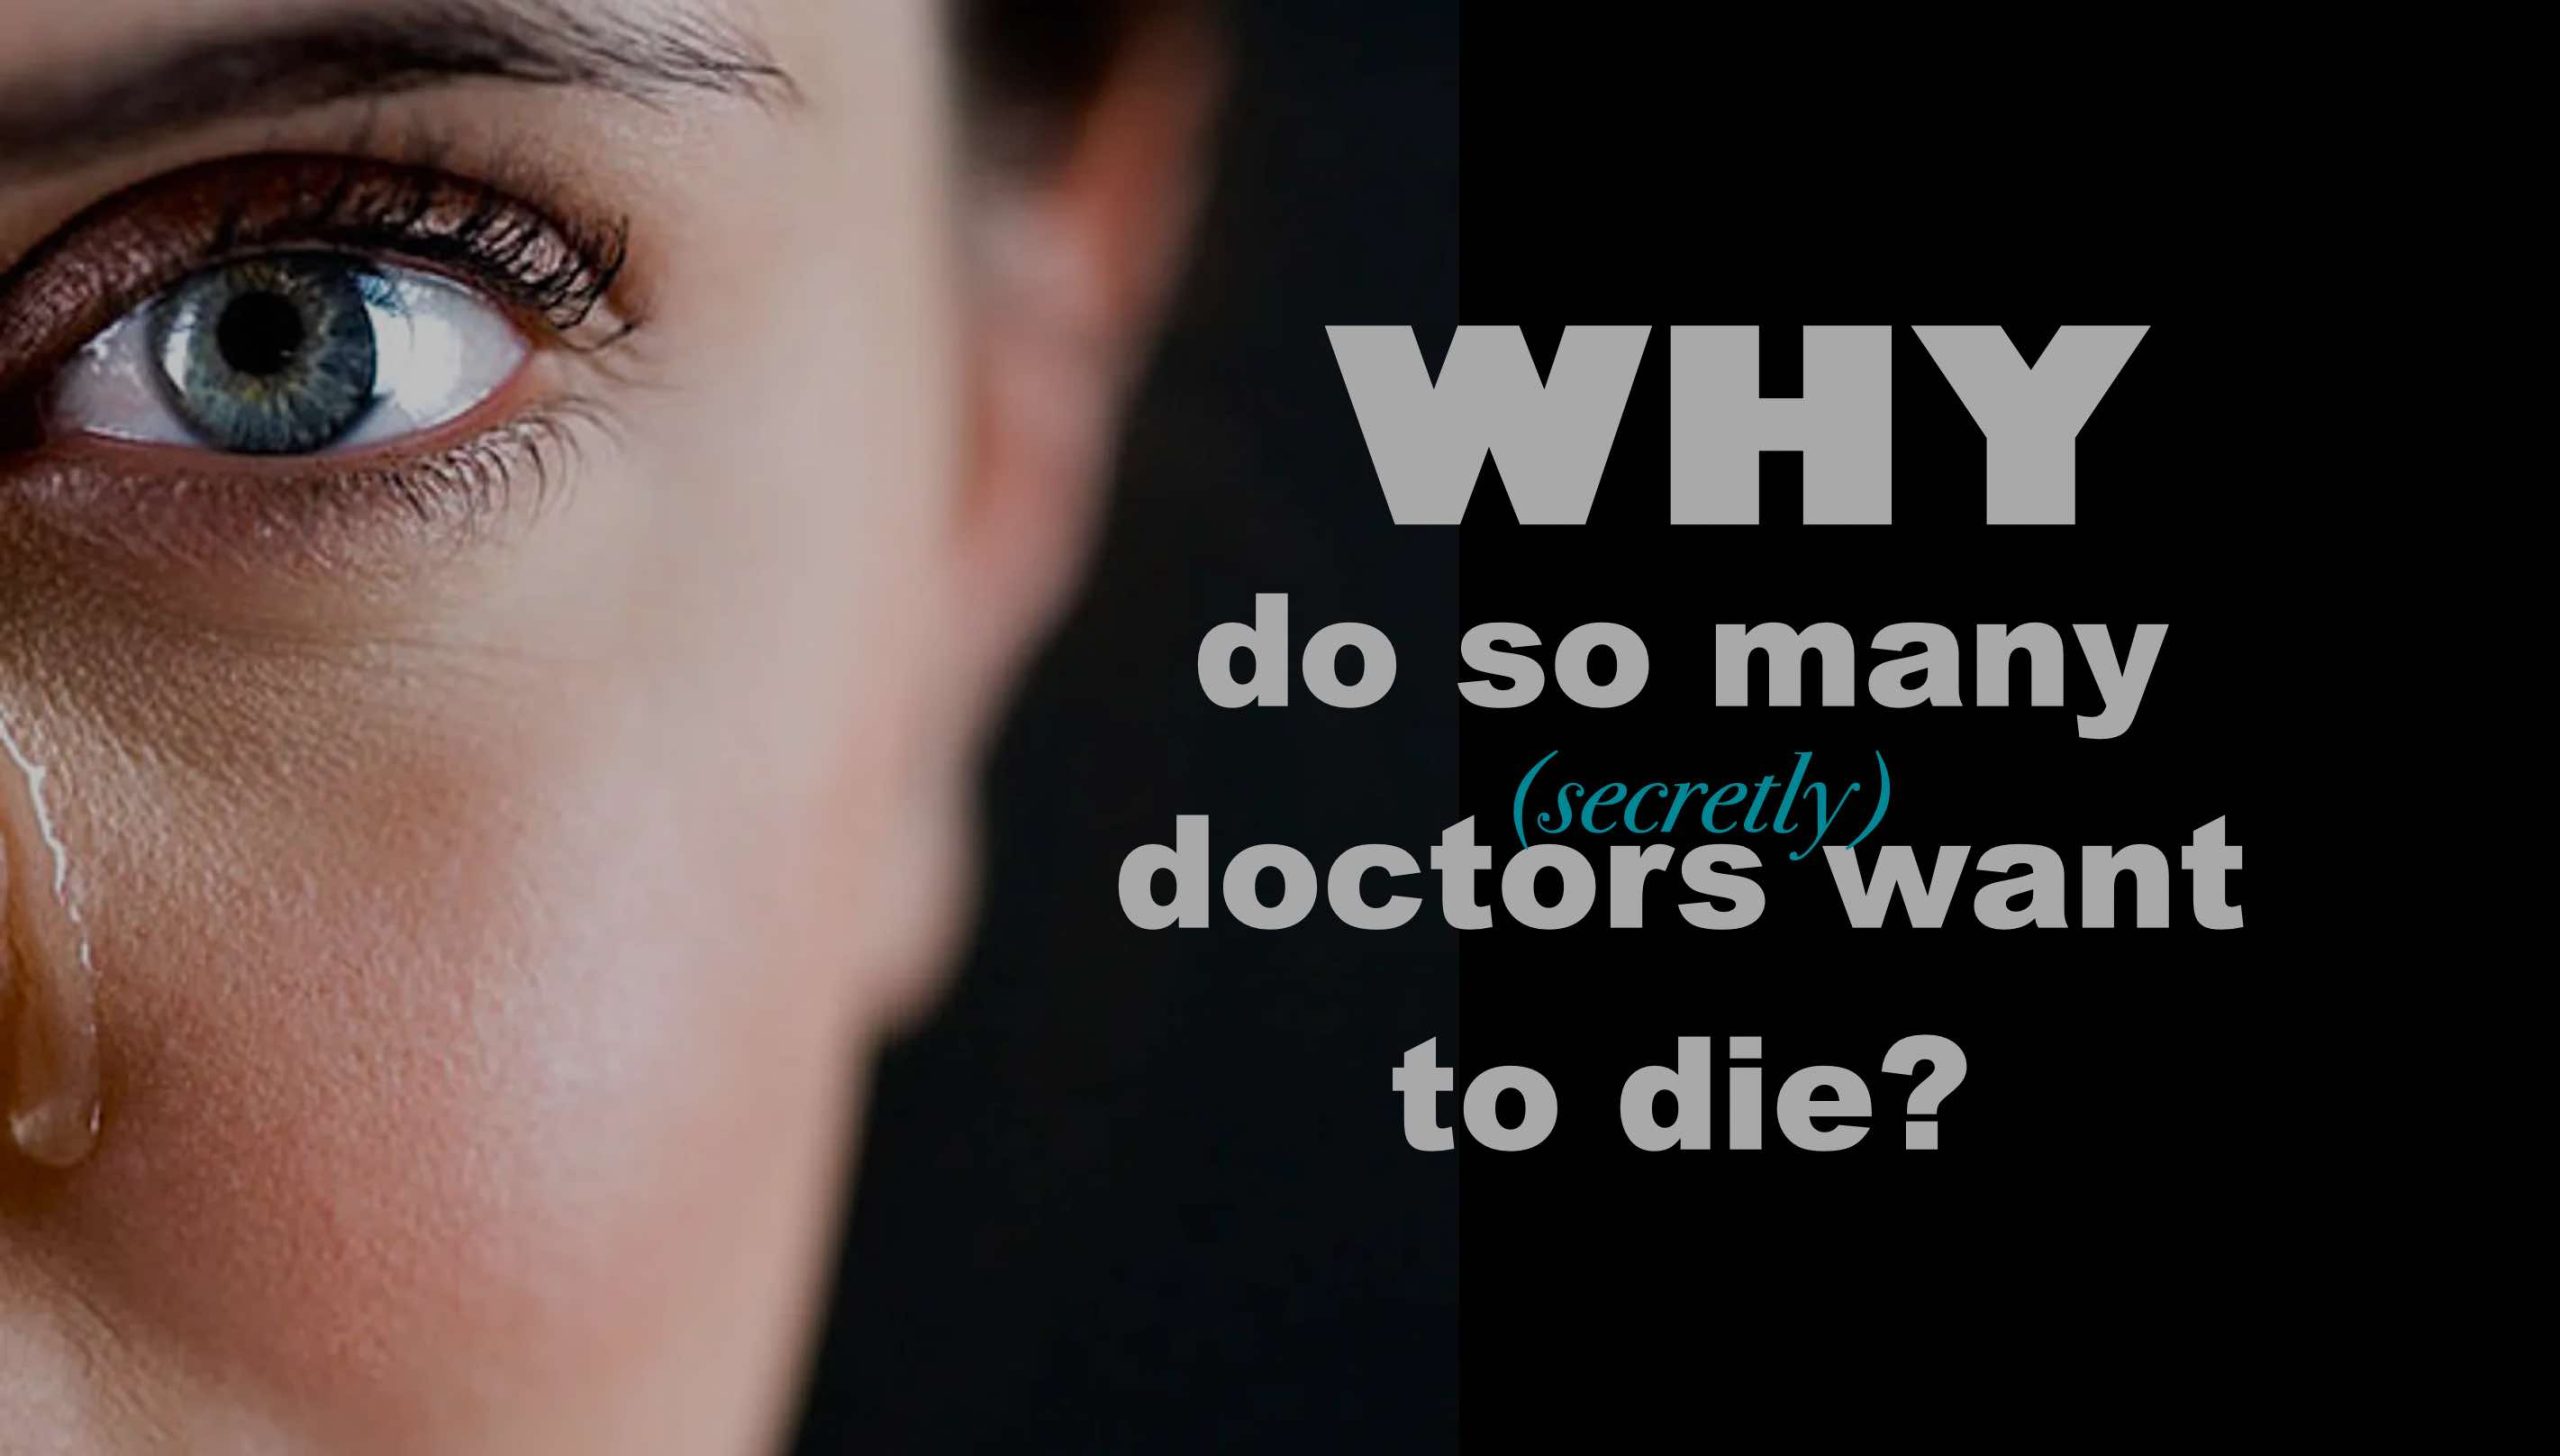 woman doctor crying. Why do so many doctors secretly want to die?